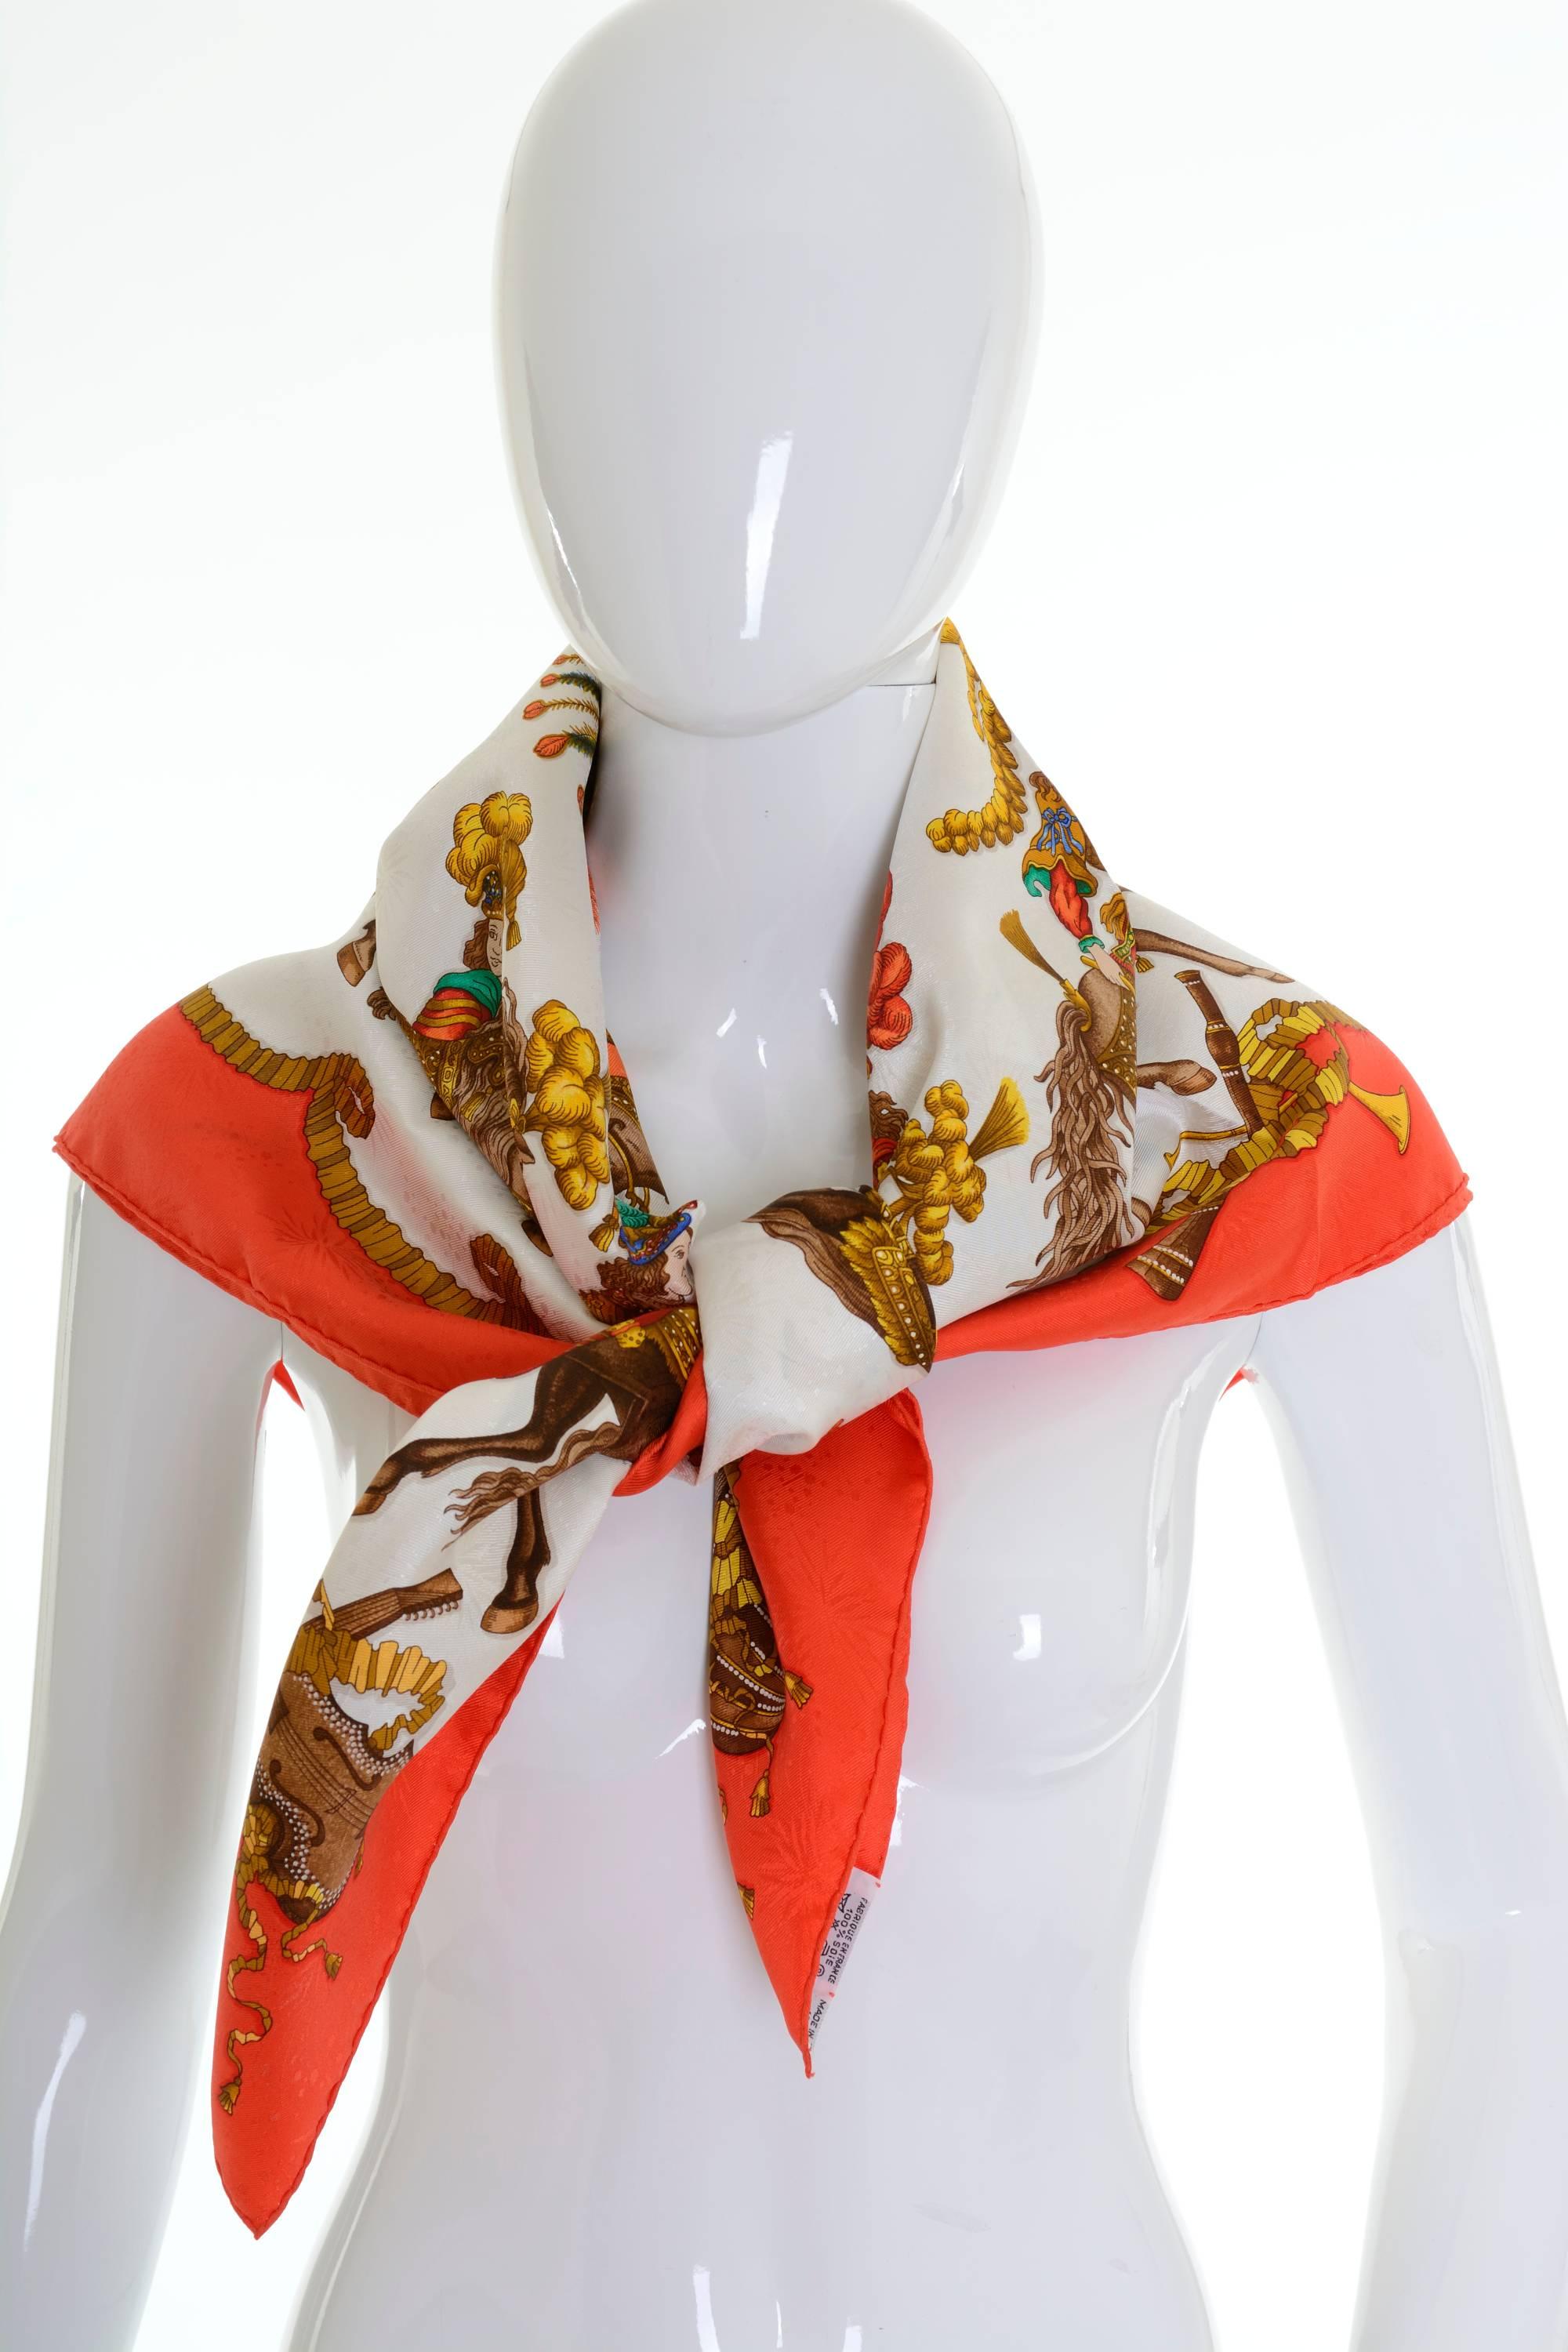 This authentic Hermès Scarf is 100% silk and has white background with equestrian motif, with red hand-rolled edging. 

New condition with Original Orange Box (never used, very fresh crisp)

Design by Michel Duchene, first issued in 1994 -Made in